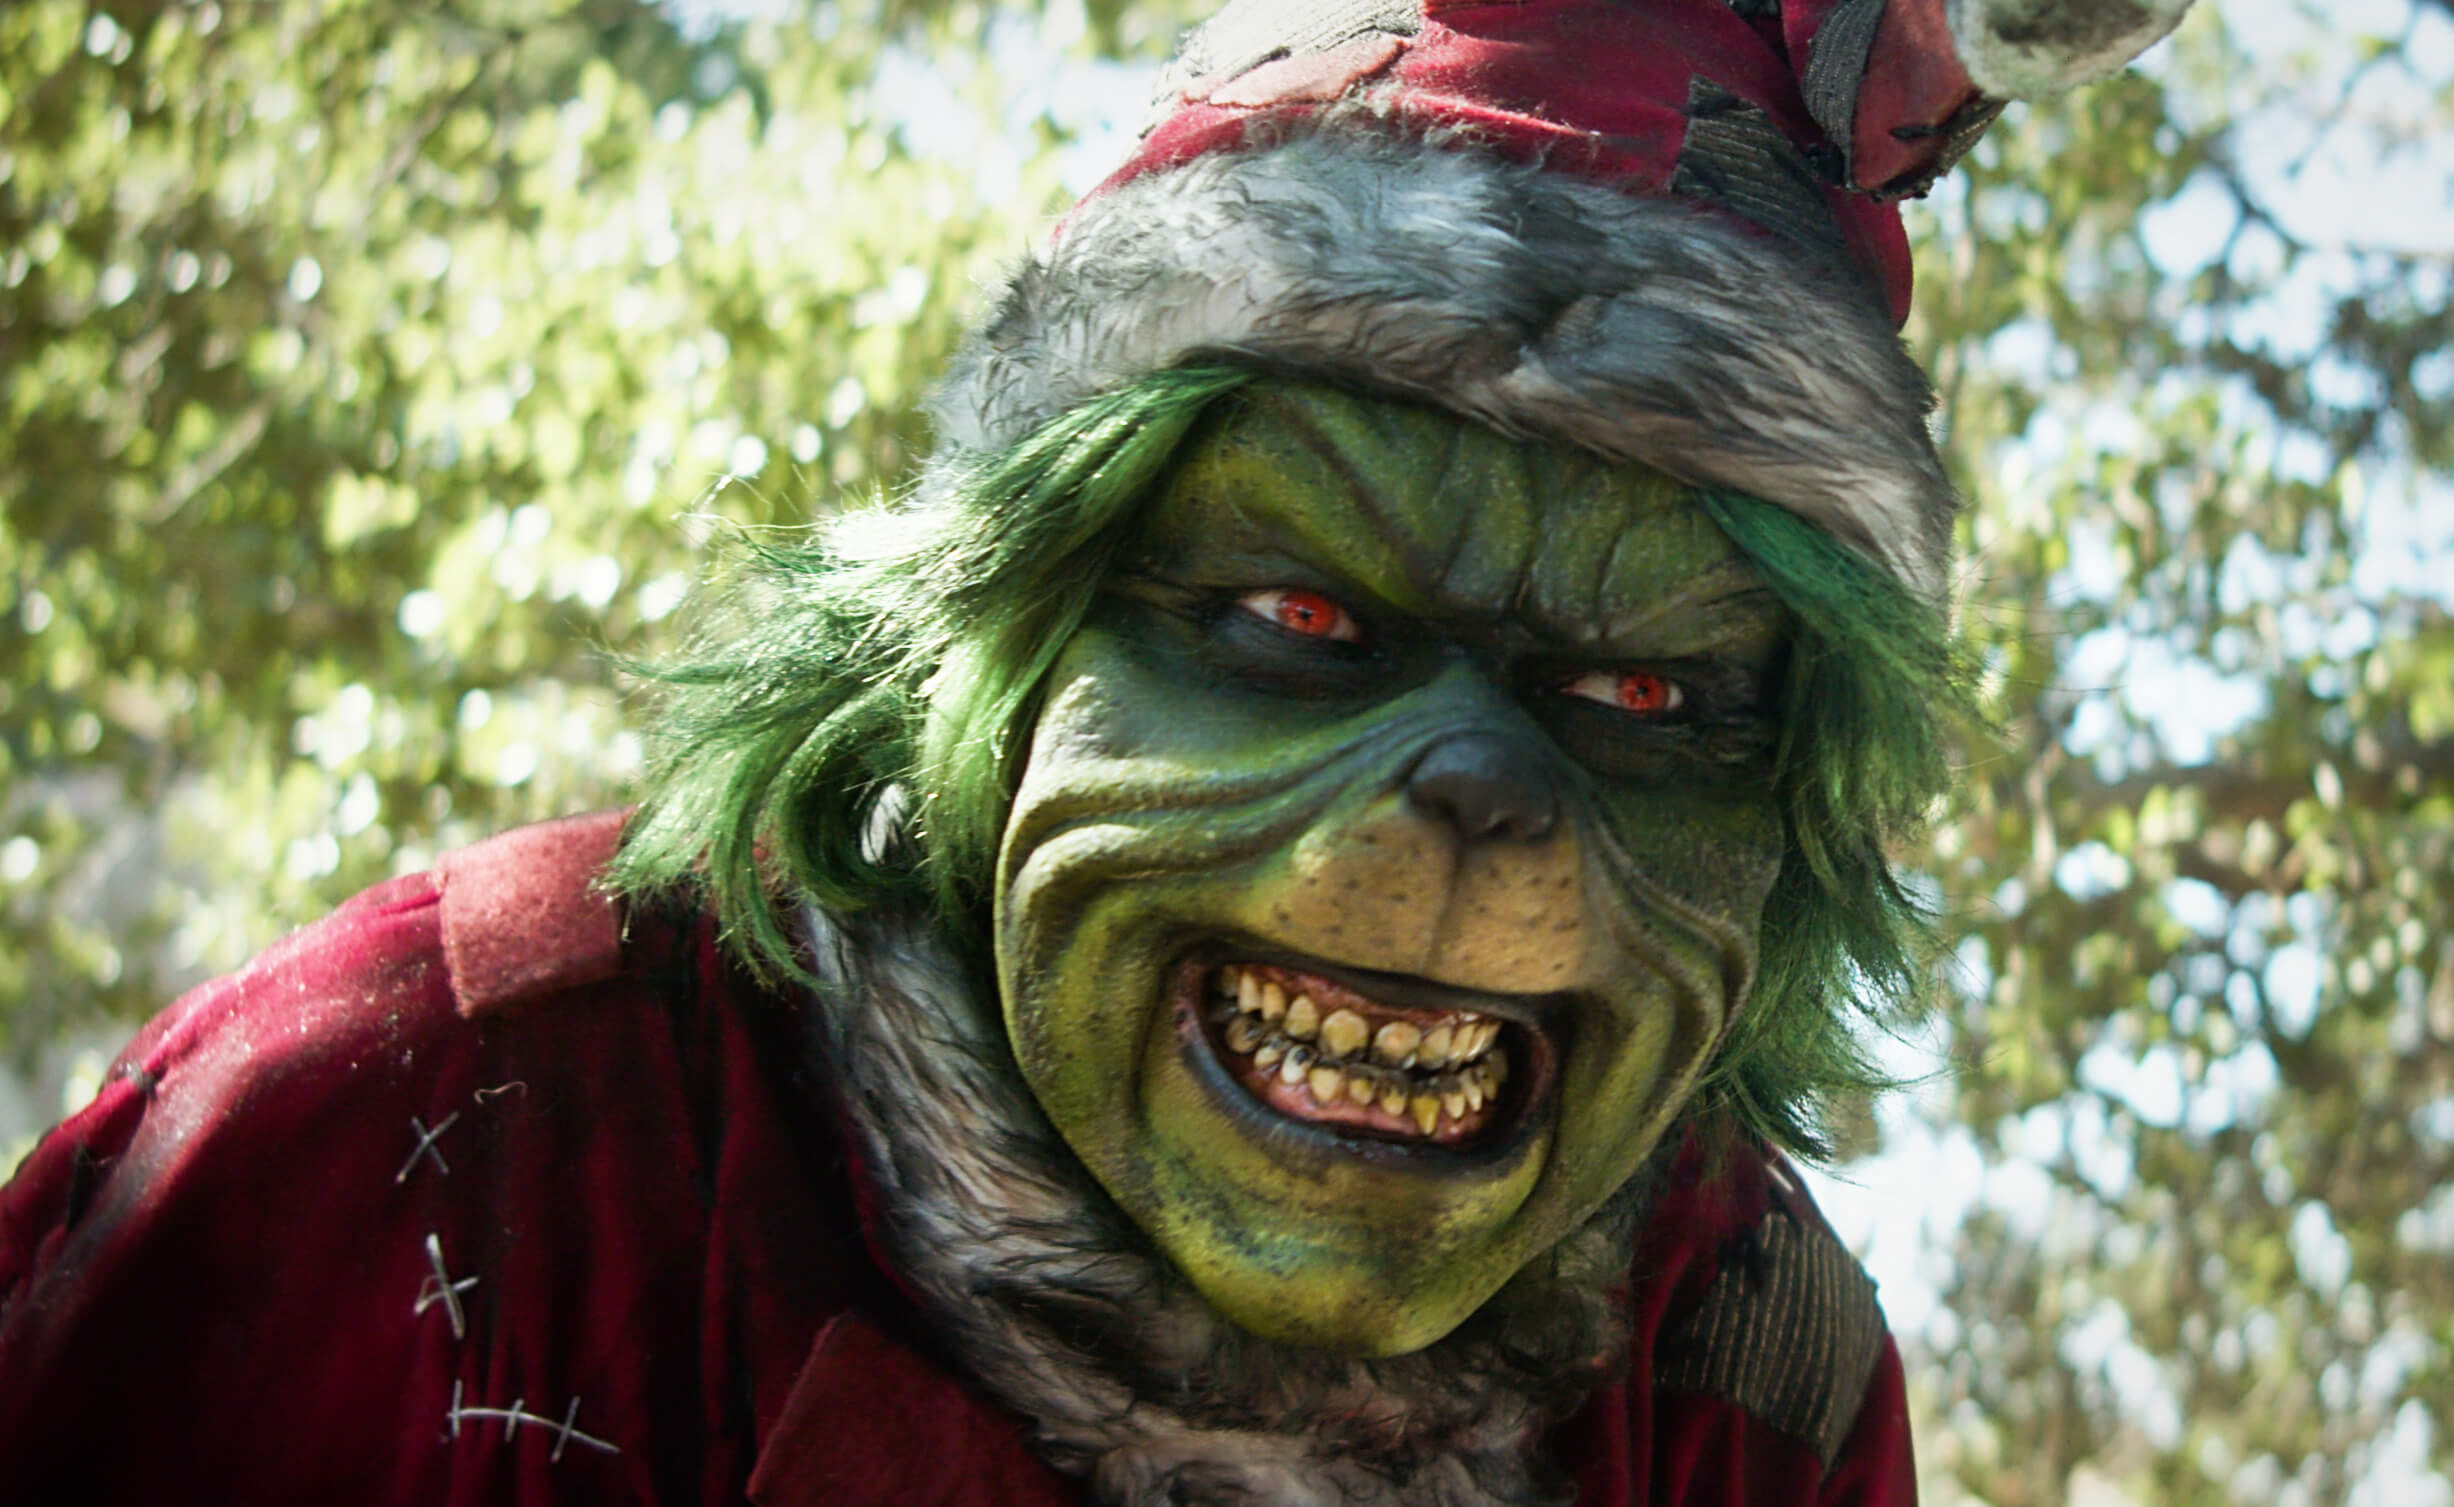 The Mean One (essentially an evil Grinch) grinning maliciously